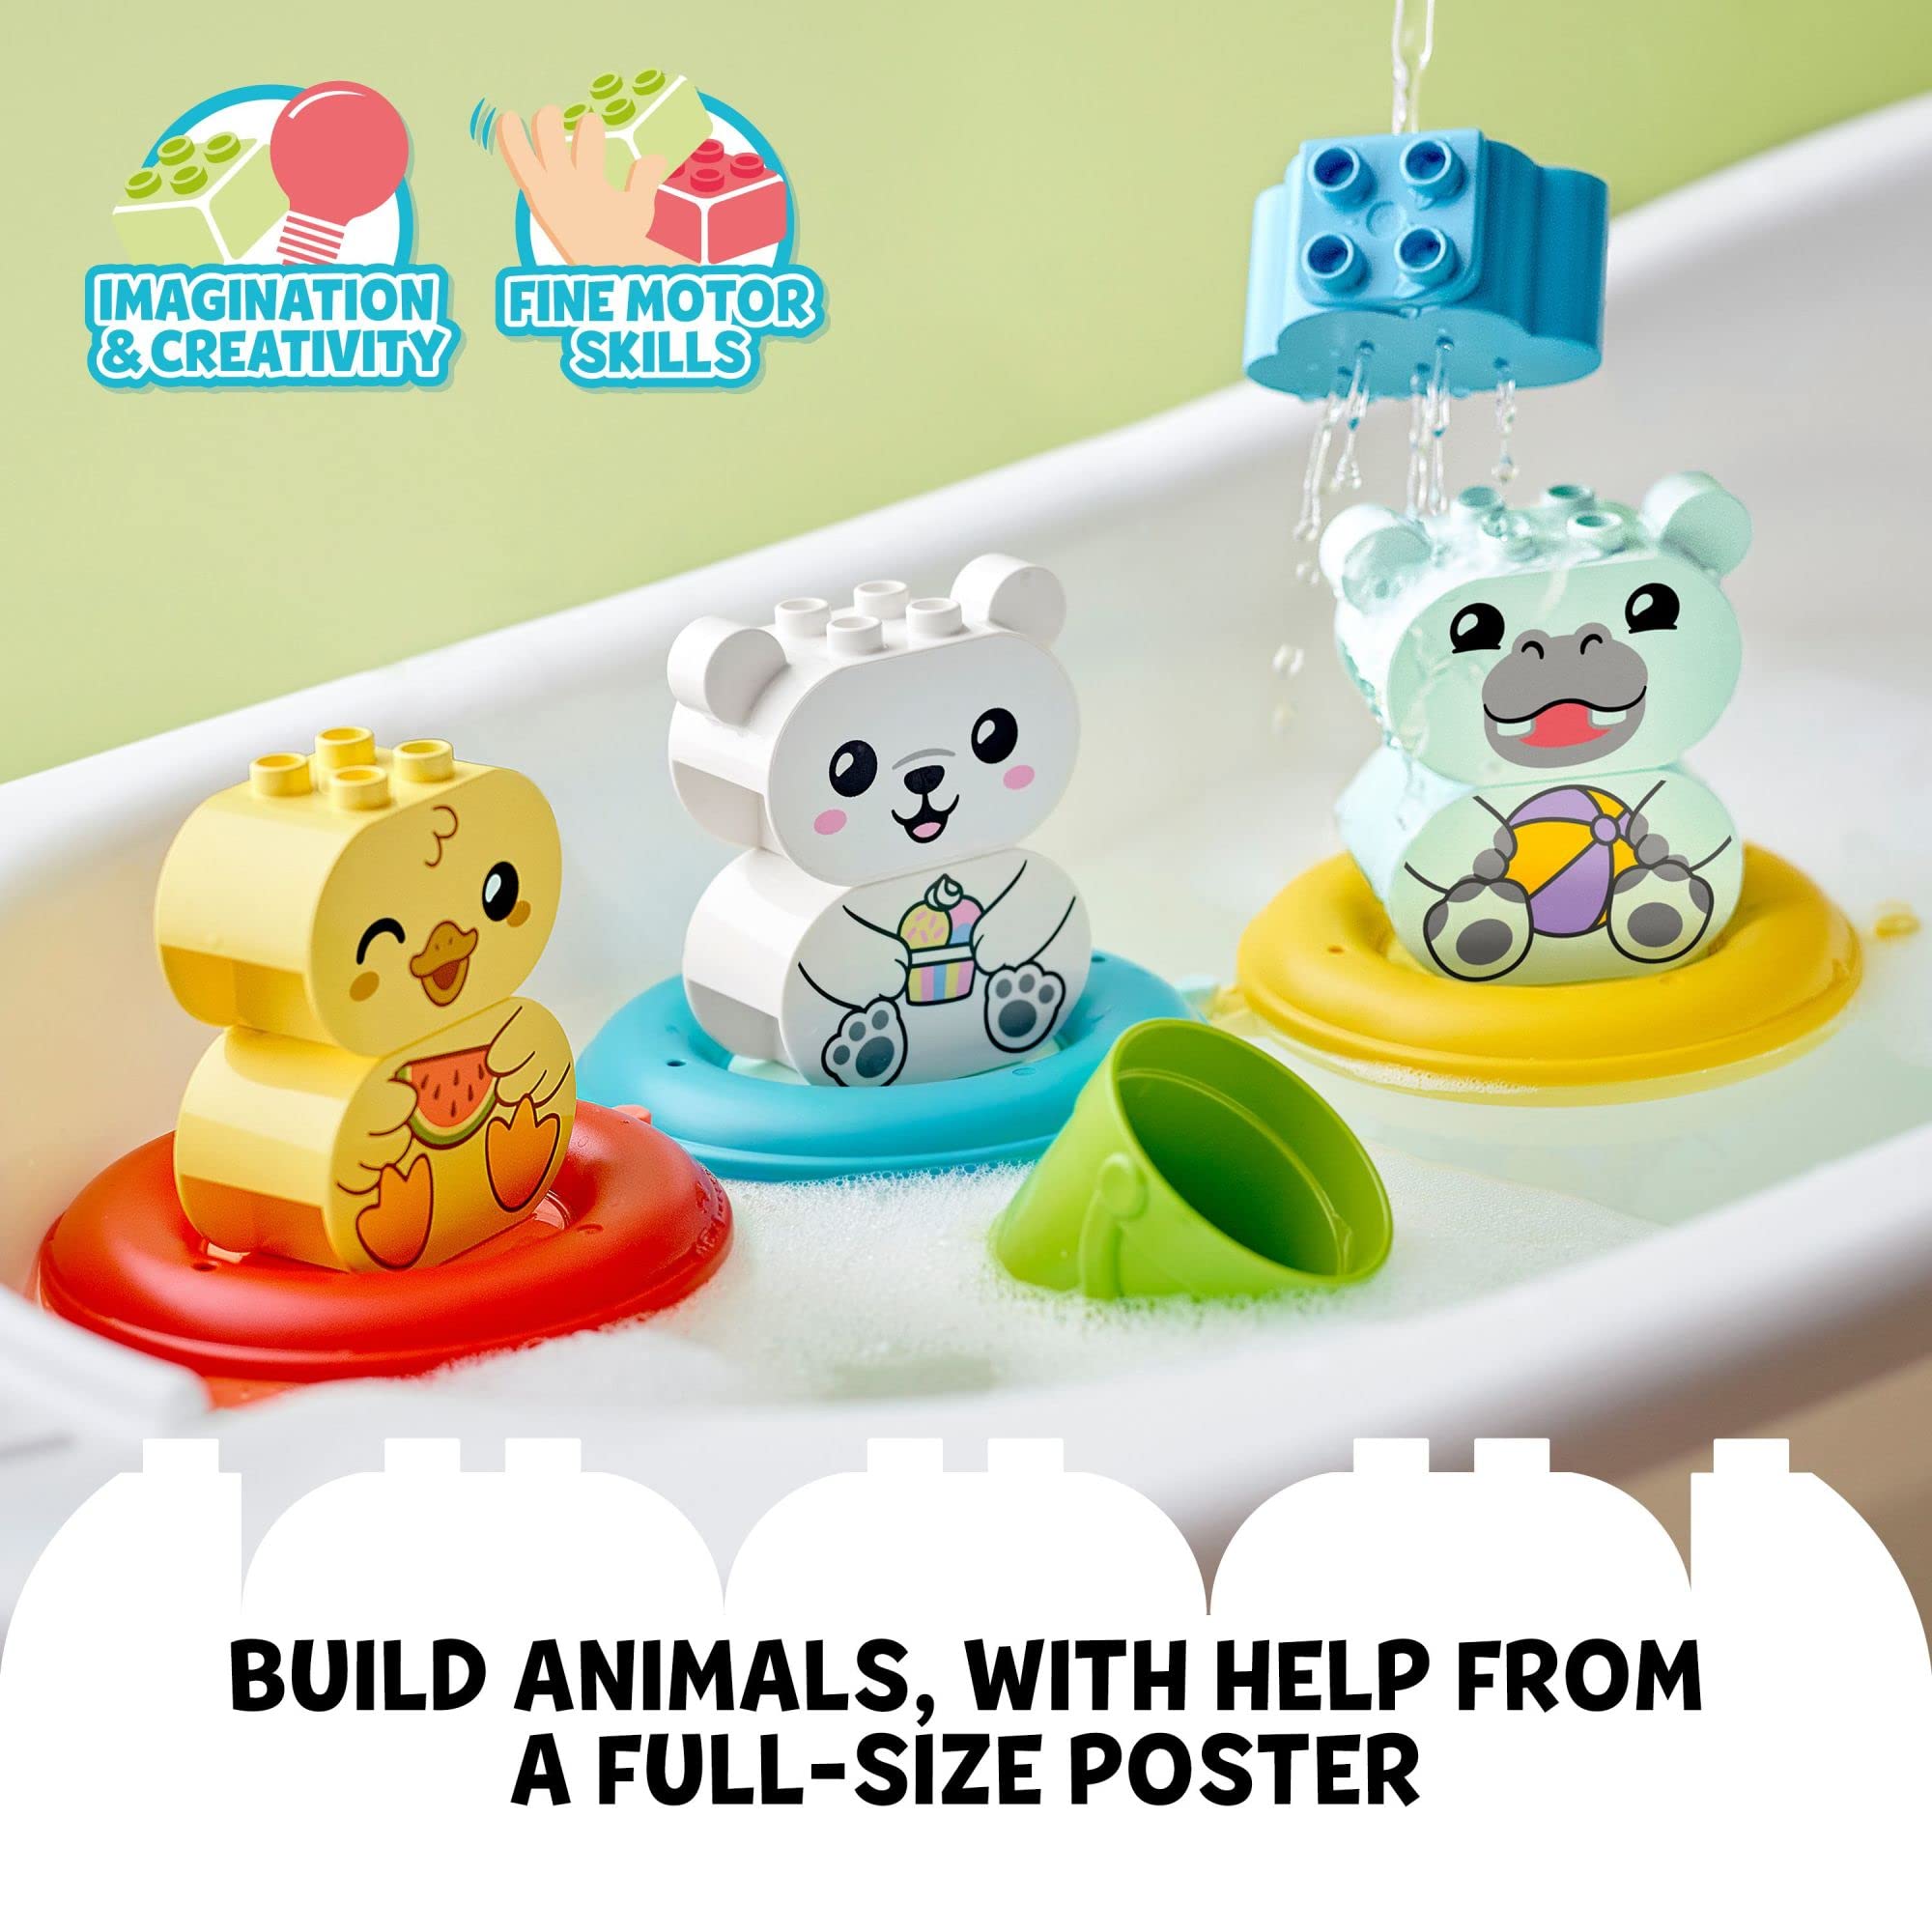 LEGO DUPLO 10965 - Bath Time Fun, Floating Animal Train Bathtub Water Toy for Babies and Toddlers 1.5-3 Years Old with Duck, Hippo, and Polar Bear, Easy to Clean, Great Tub Float Toy for Kids